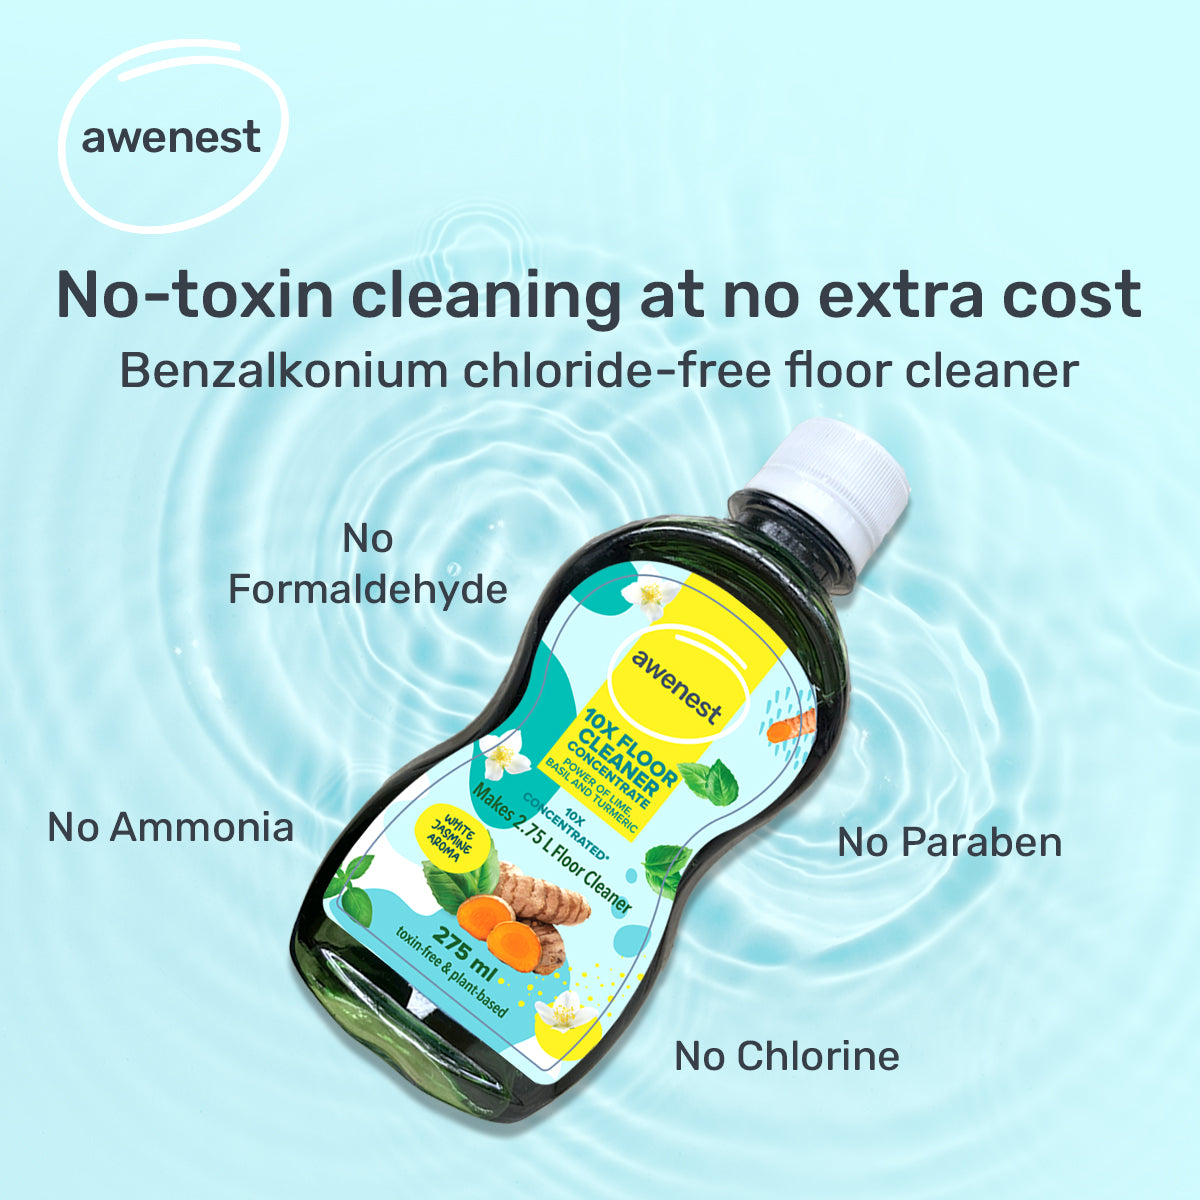 awenest 10x toxin-free floor cleaner with no ammonia, chlorine, paraben, formaldehyde